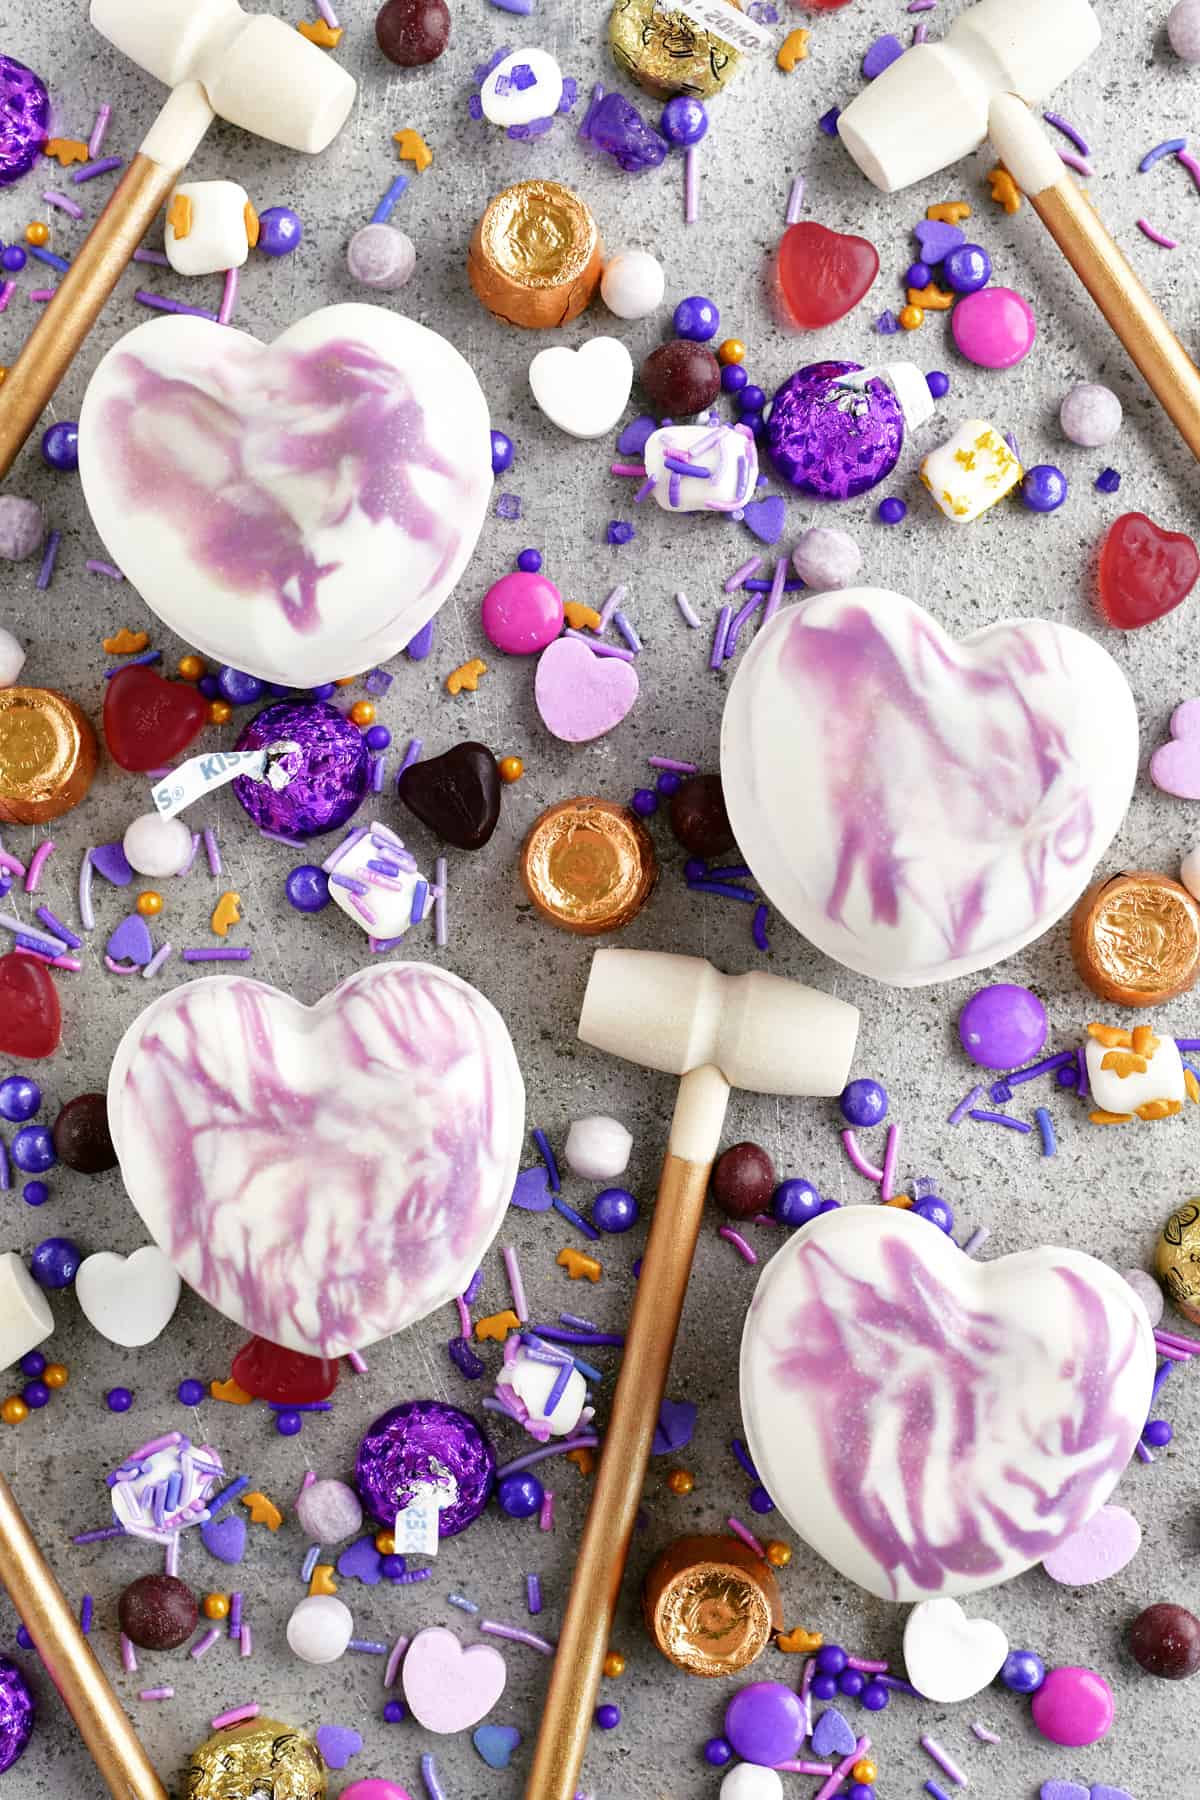 breakable chocolate hearts with candy and mini mallets